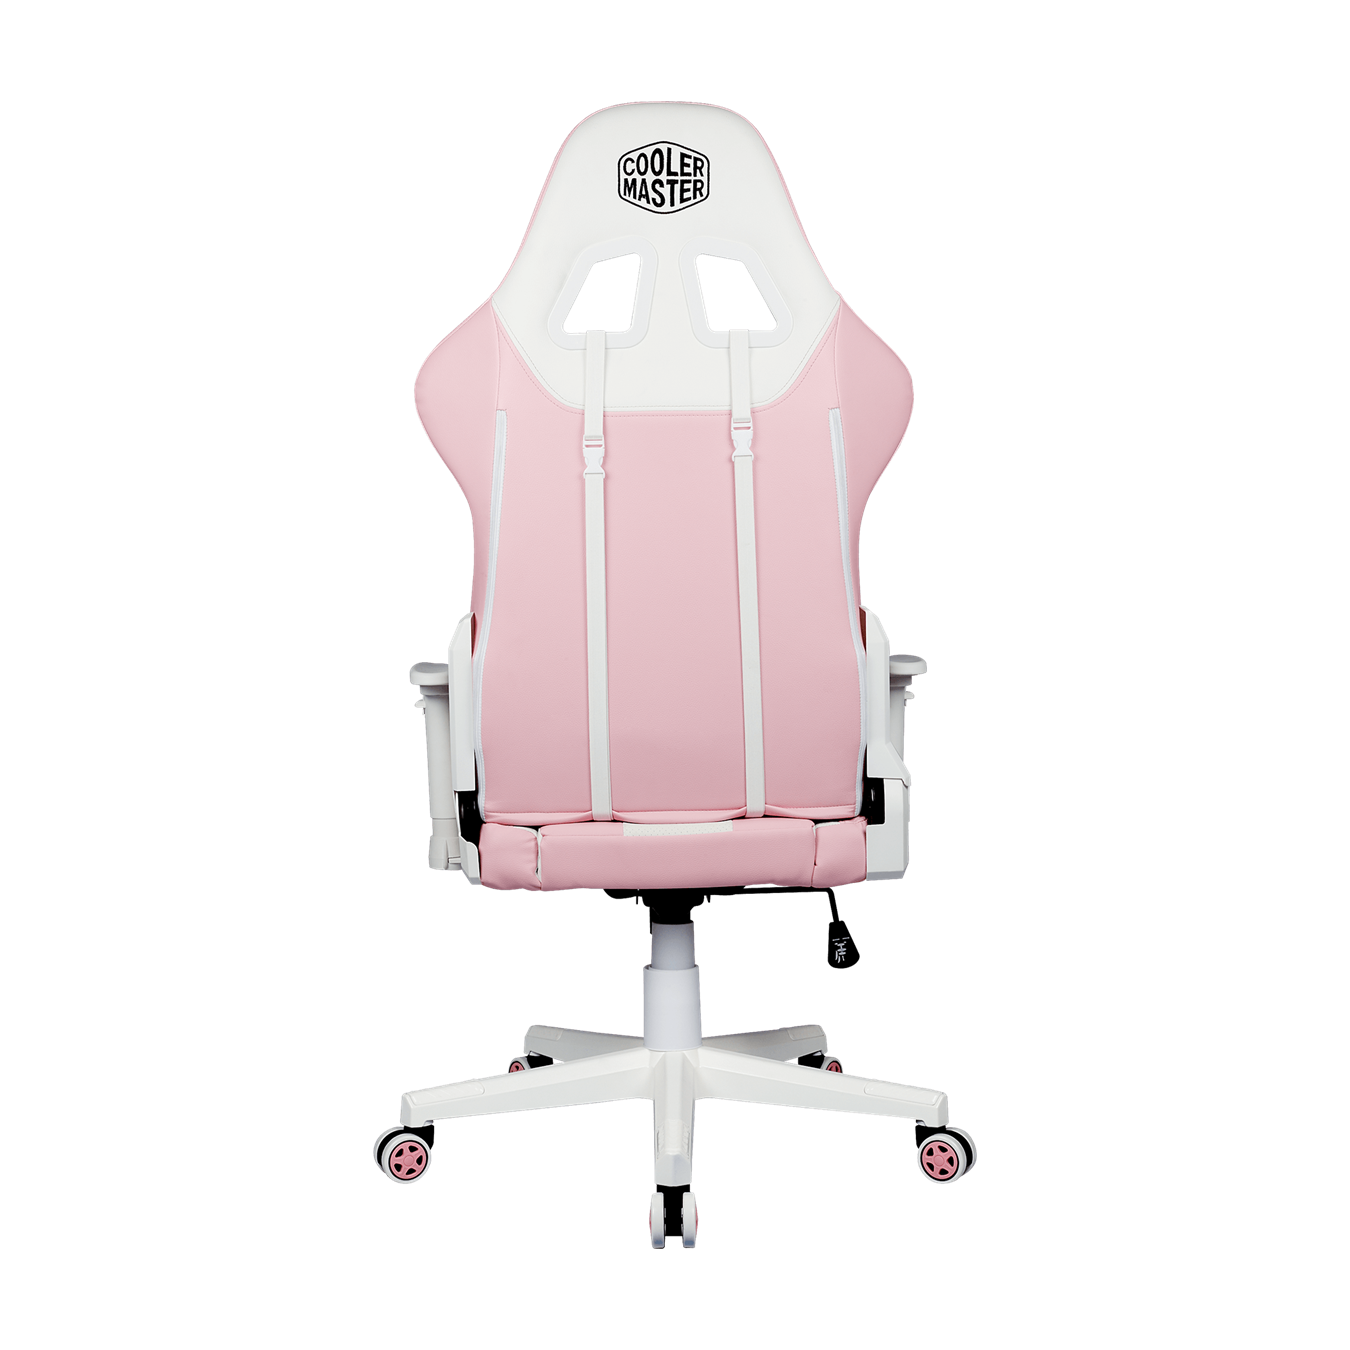 Caliber R1S Rose White Edition Gaming Chair - Provides maximum comfort for all body types and keeps you feeling cool by allowing air flow and evaporation.